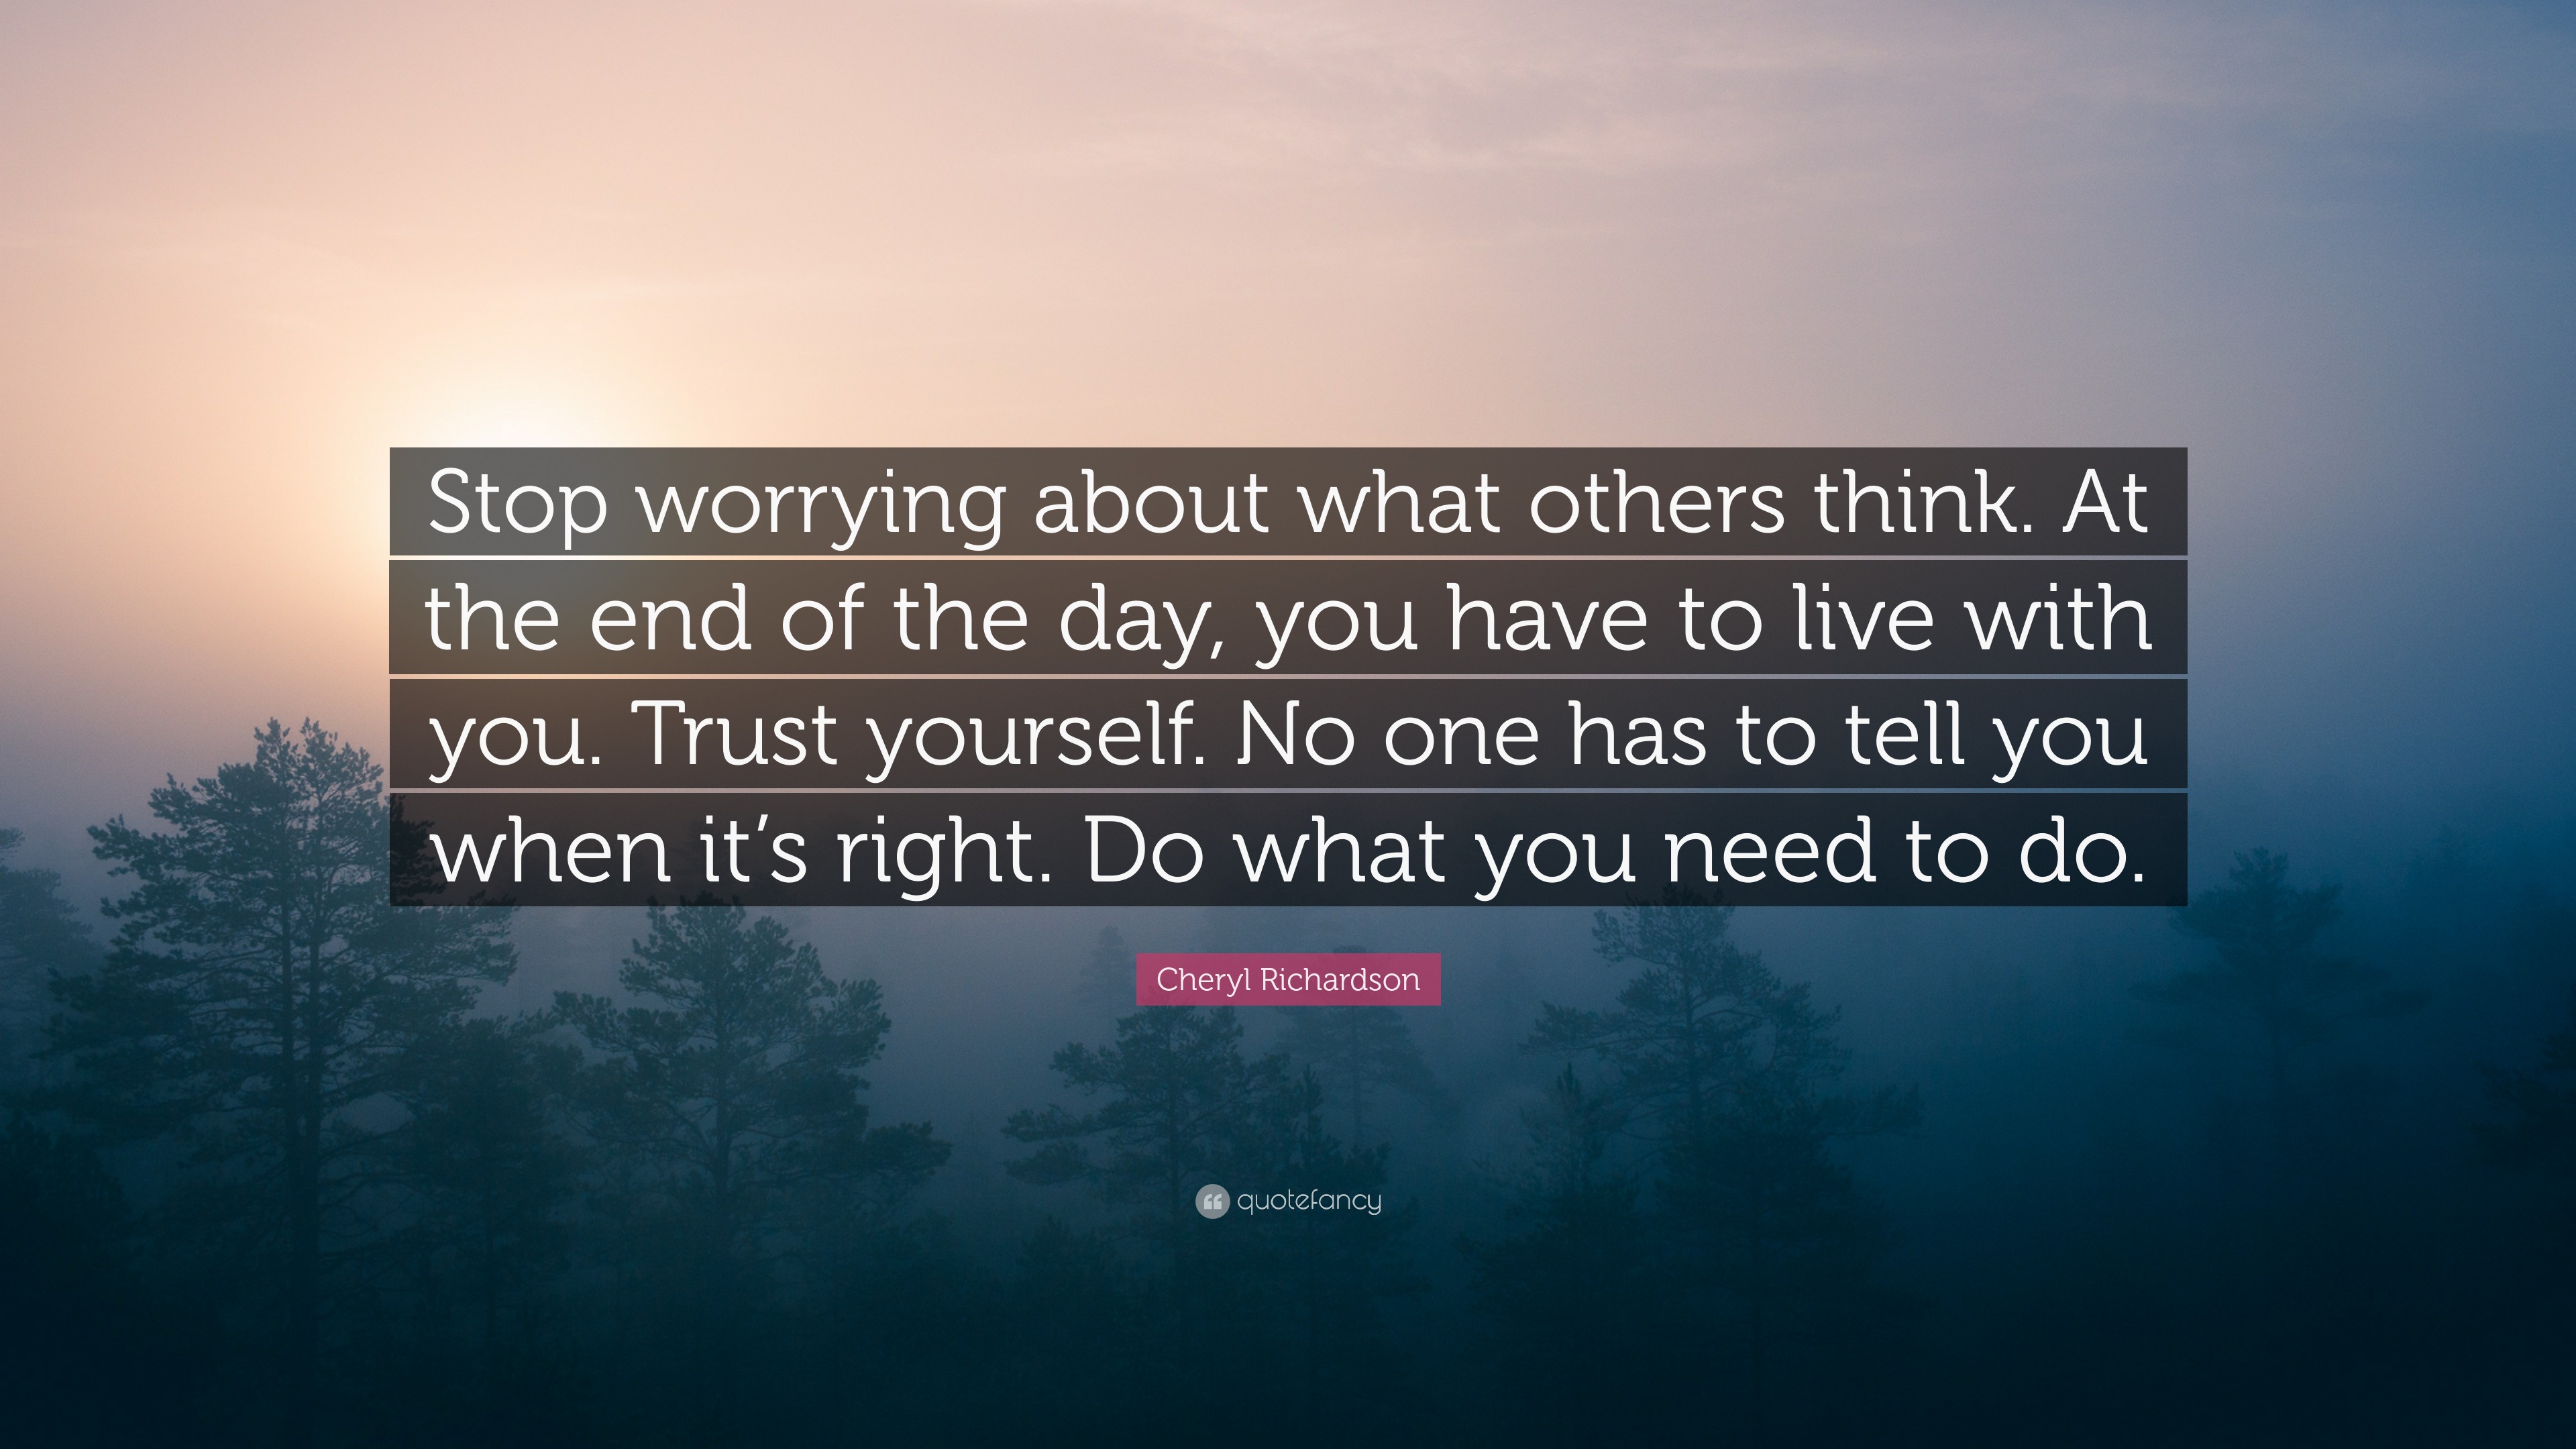 Cheryl Richardson Quote “Stop worrying about what others